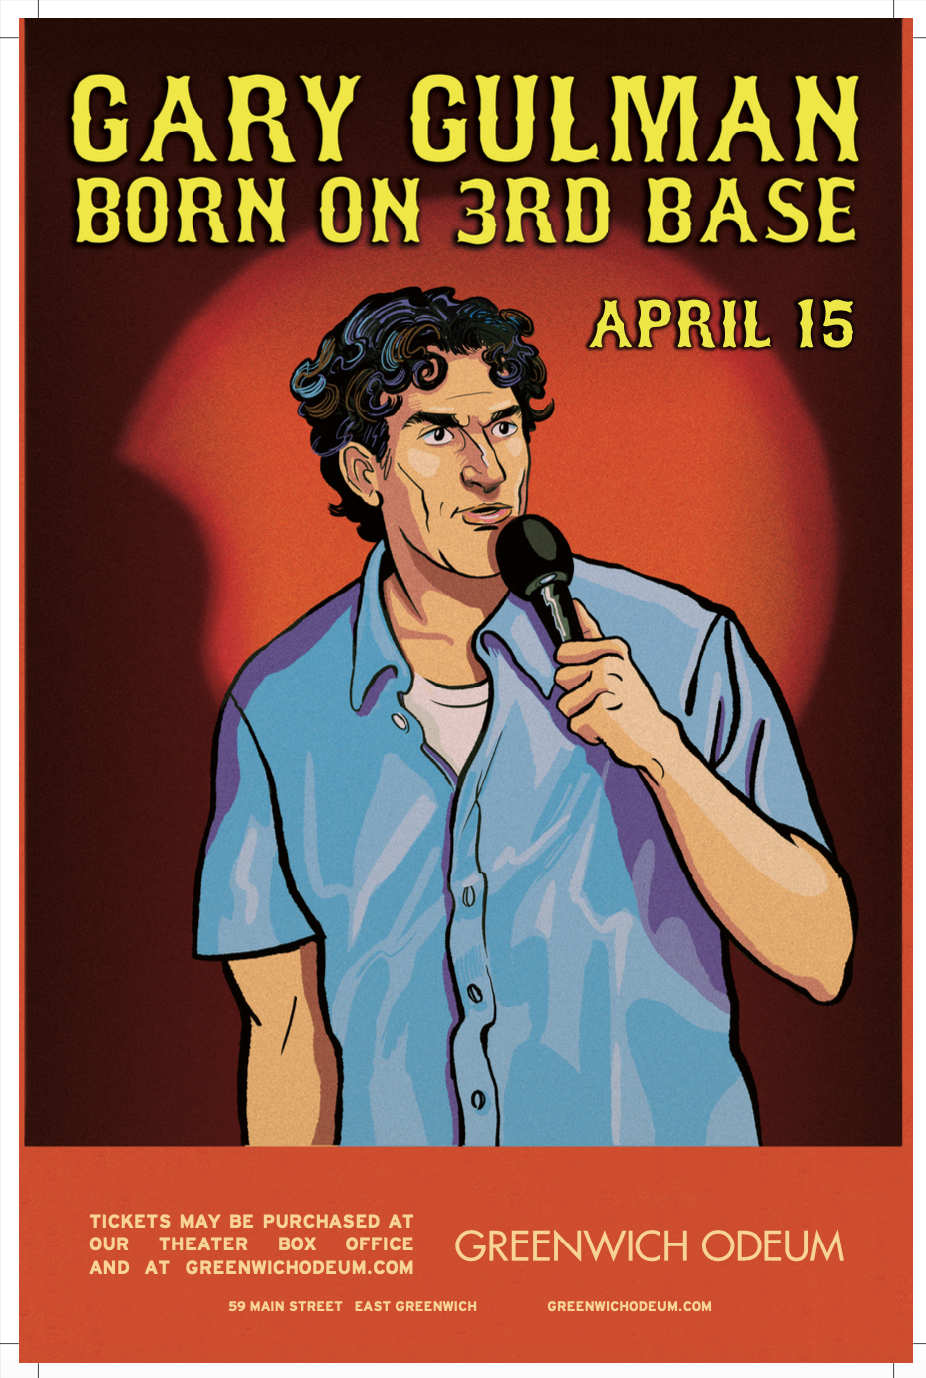 Gary Gulman - Born on 3rd Base  Autographed Poster